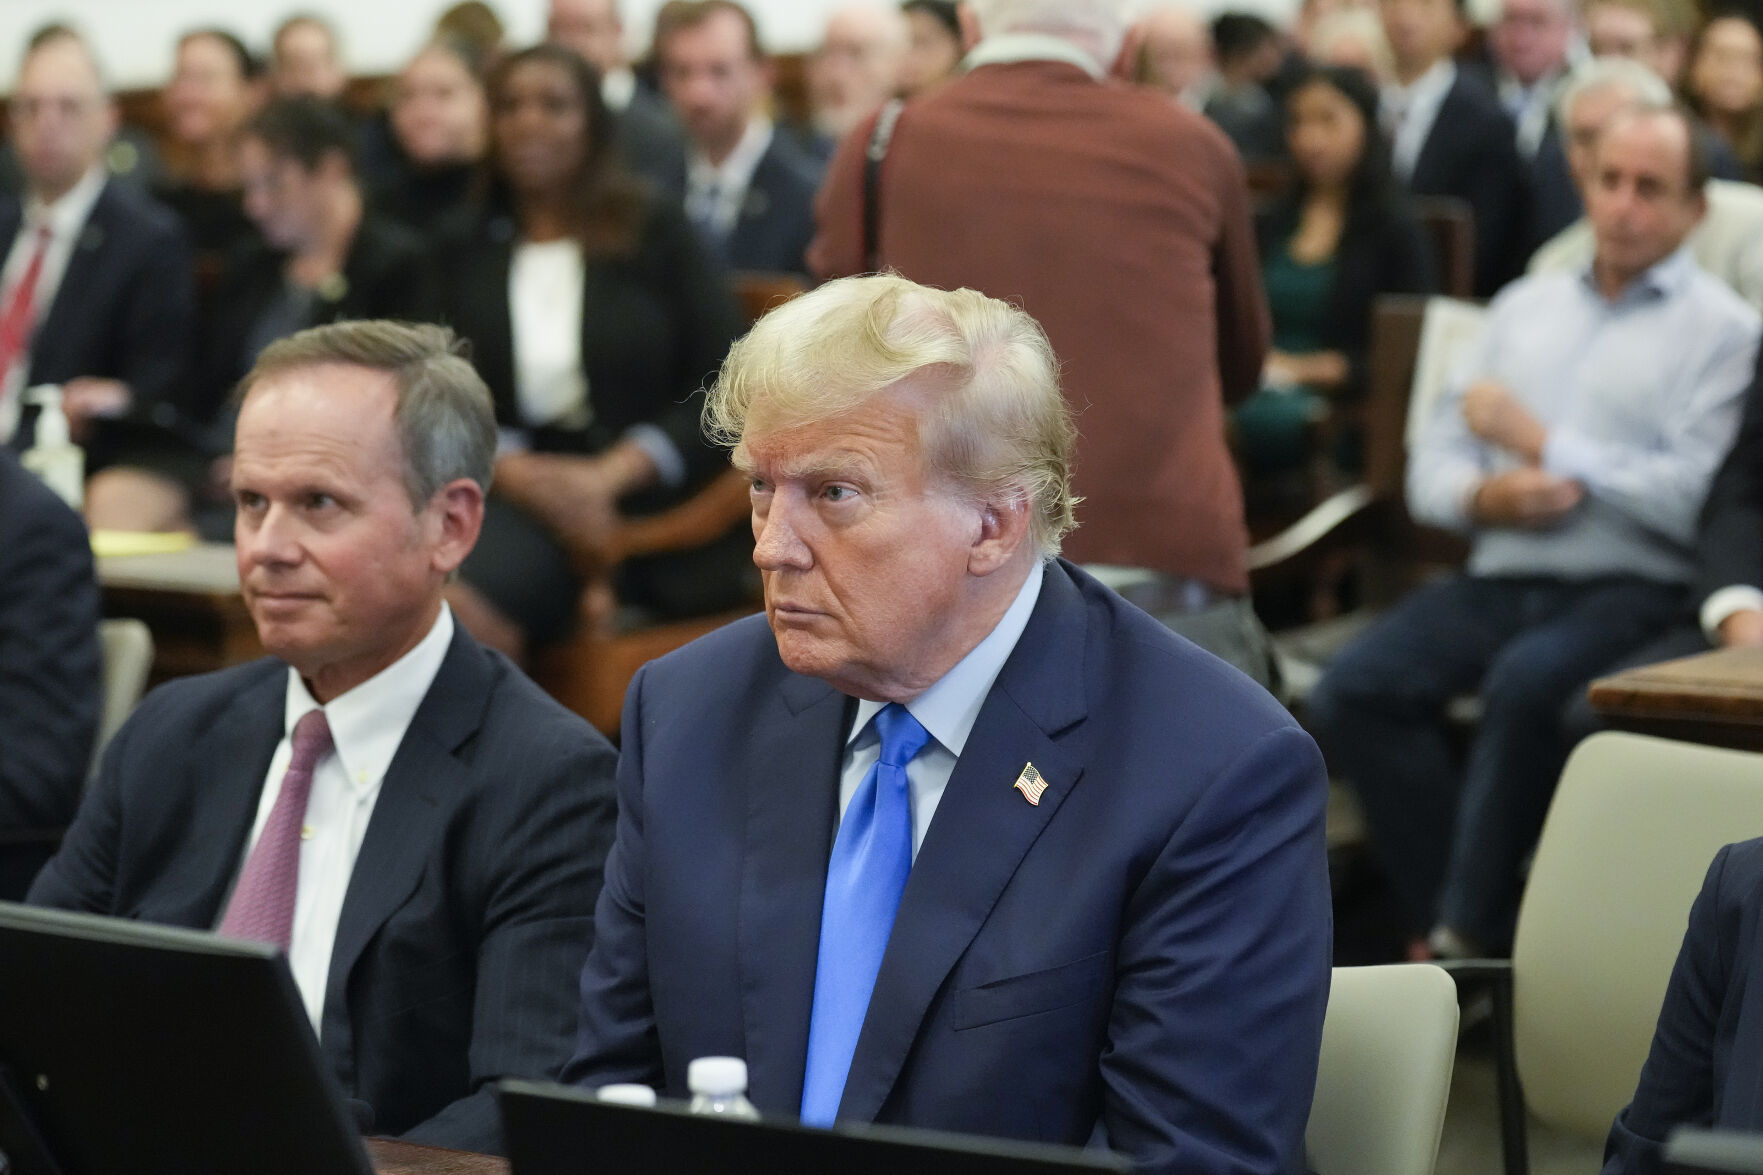 <p>Former President Donald Trump, right, sits in the courtroom at New York Supreme Court, Monday, Oct. 2, 2023, in New York. Trump is making a rare, voluntary trip to court in New York for the start of a civil trial in a lawsuit that already has resulted in a judge ruling that he committed fraud in his business dealings. (AP Photo/Seth Wenig, Pool)</p>   PHOTO CREDIT: Seth Wenig 